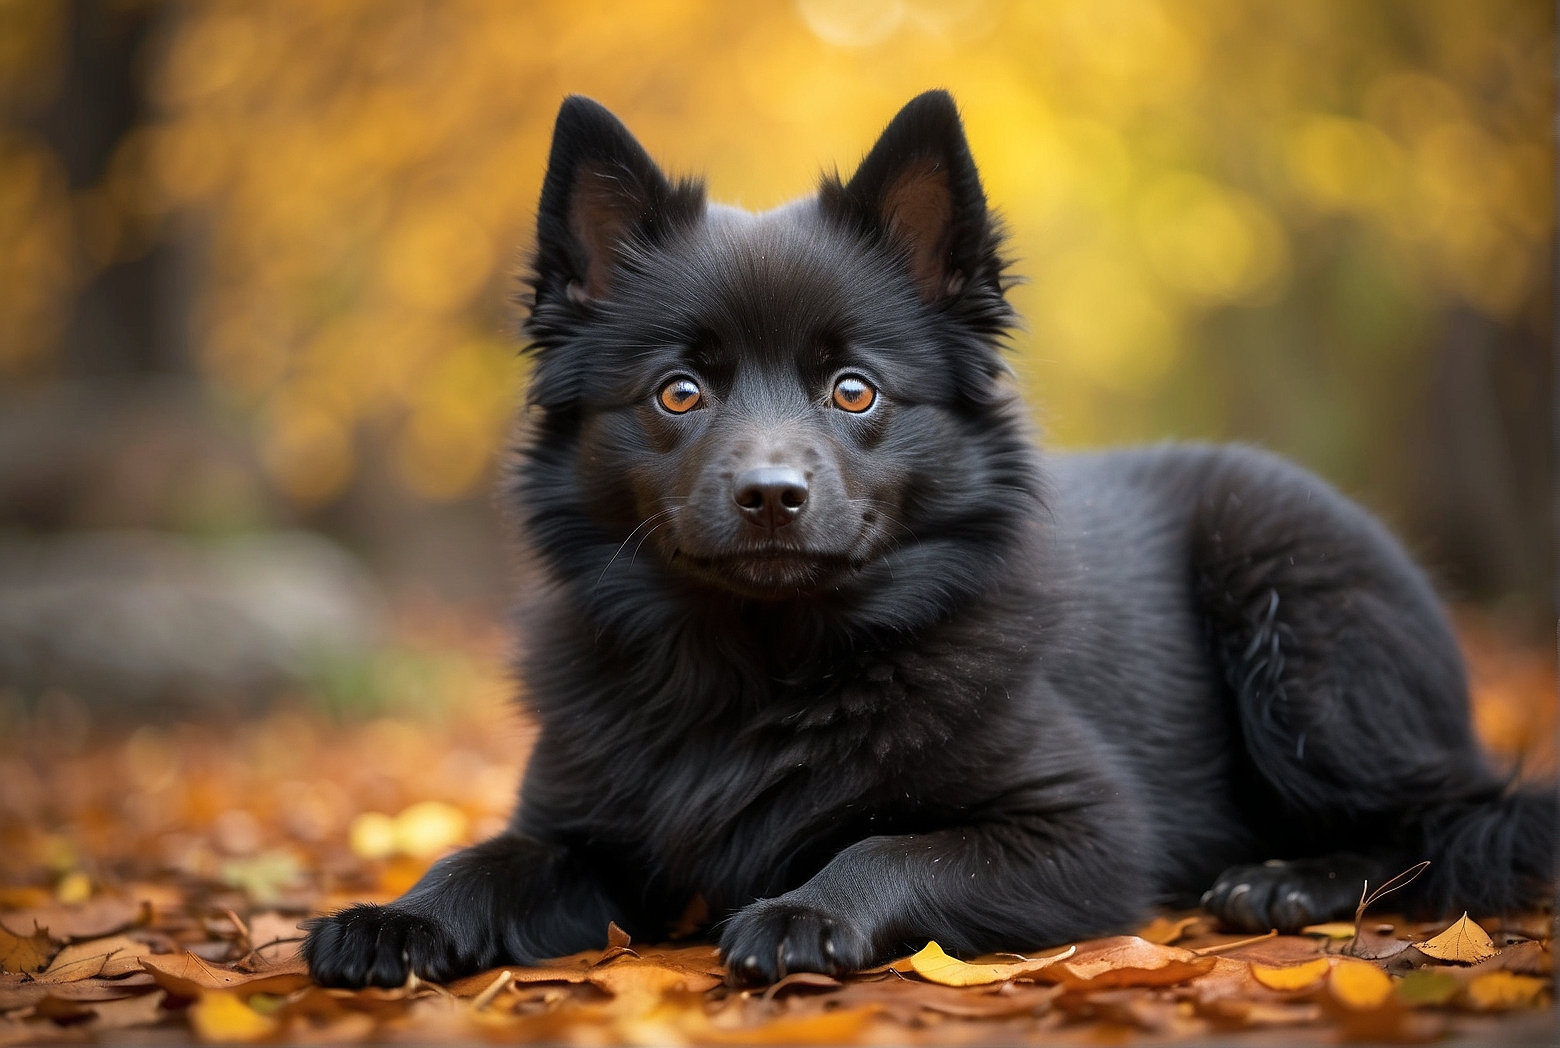 What Color Are Schipperke Eyes